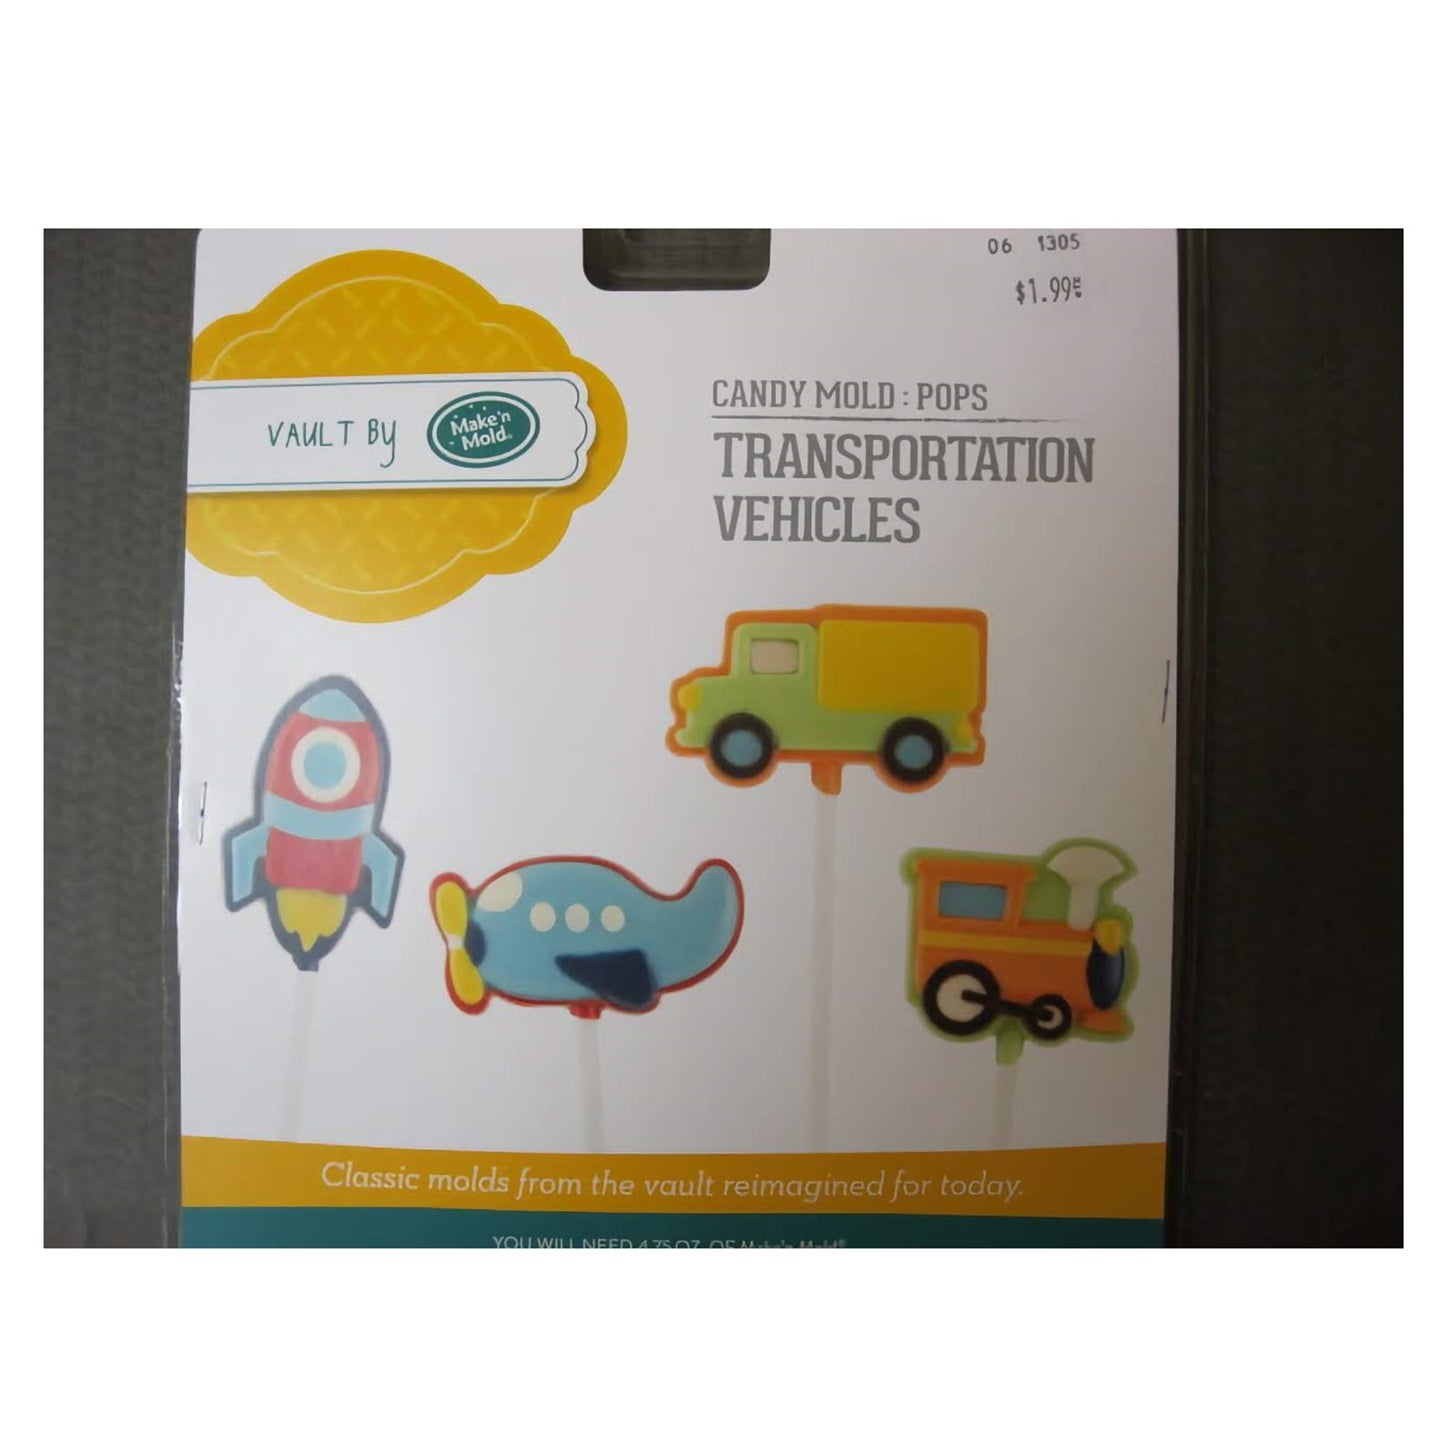 A playful chocolate mold designed for making lollipop-style chocolates in the shapes of various transportation vehicles including rockets, cars, and trains, ideal for children's parties or transportation-themed events.